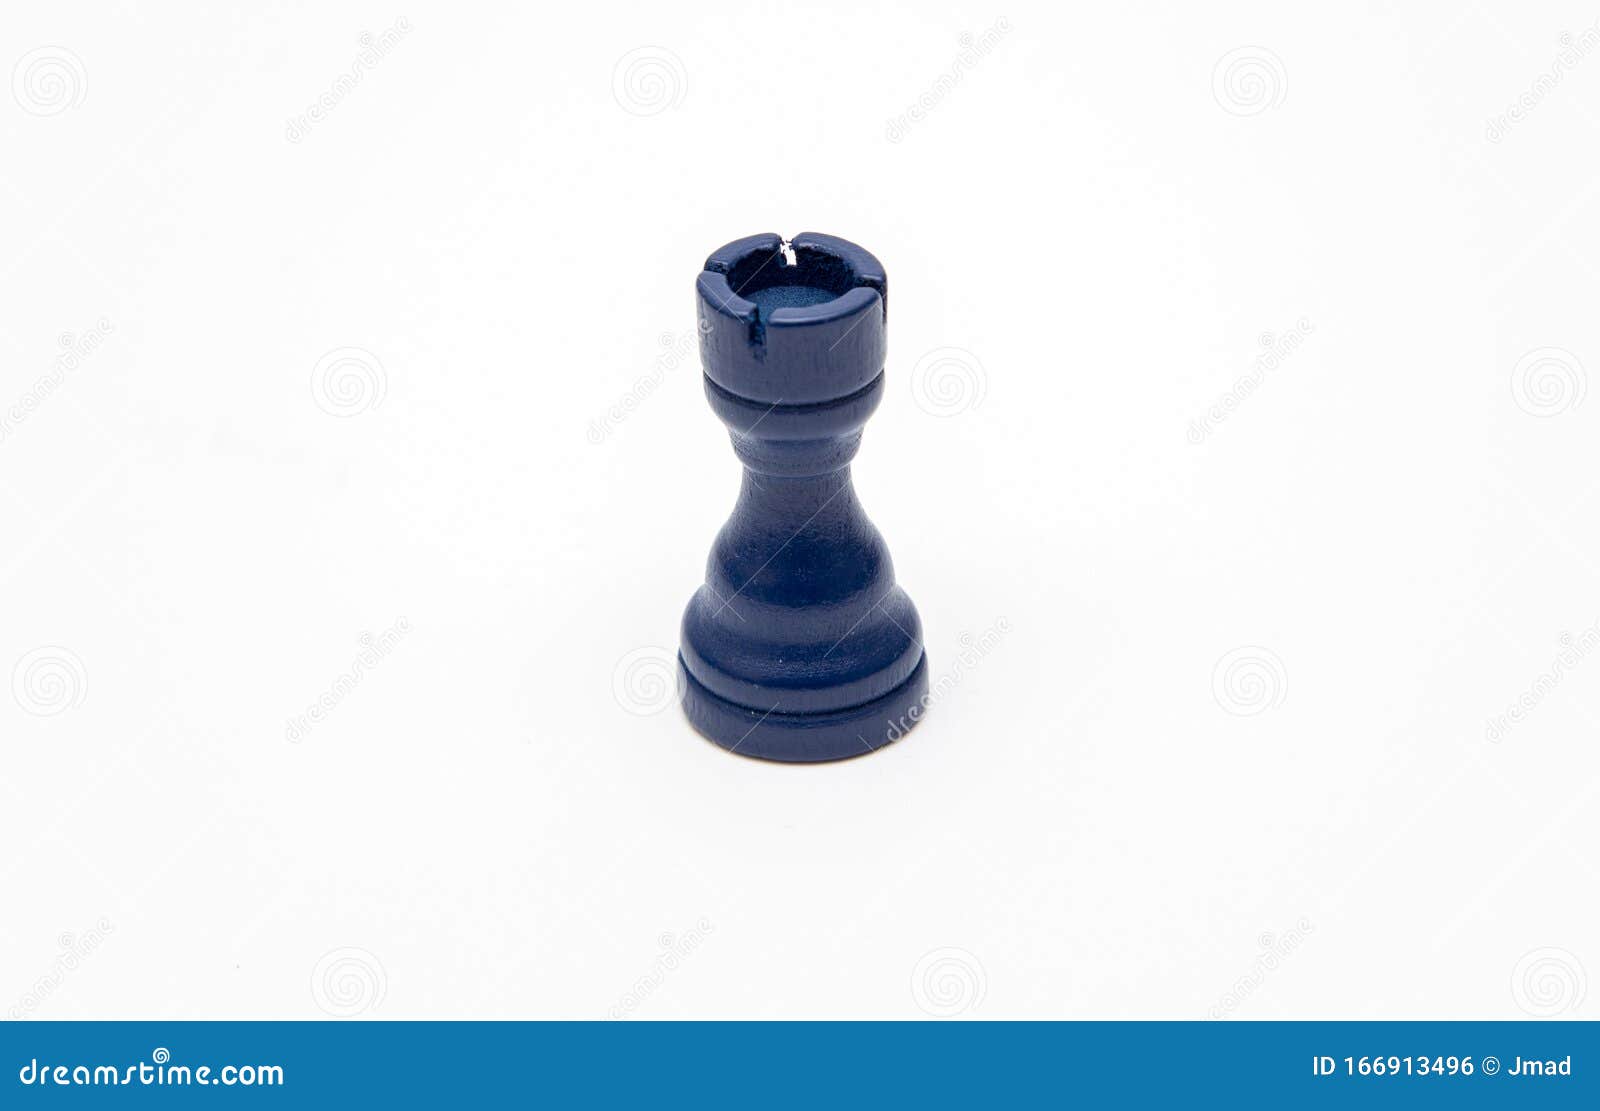 Rook Chess Piece on a White Background Stock Photo - Image of pawn ...